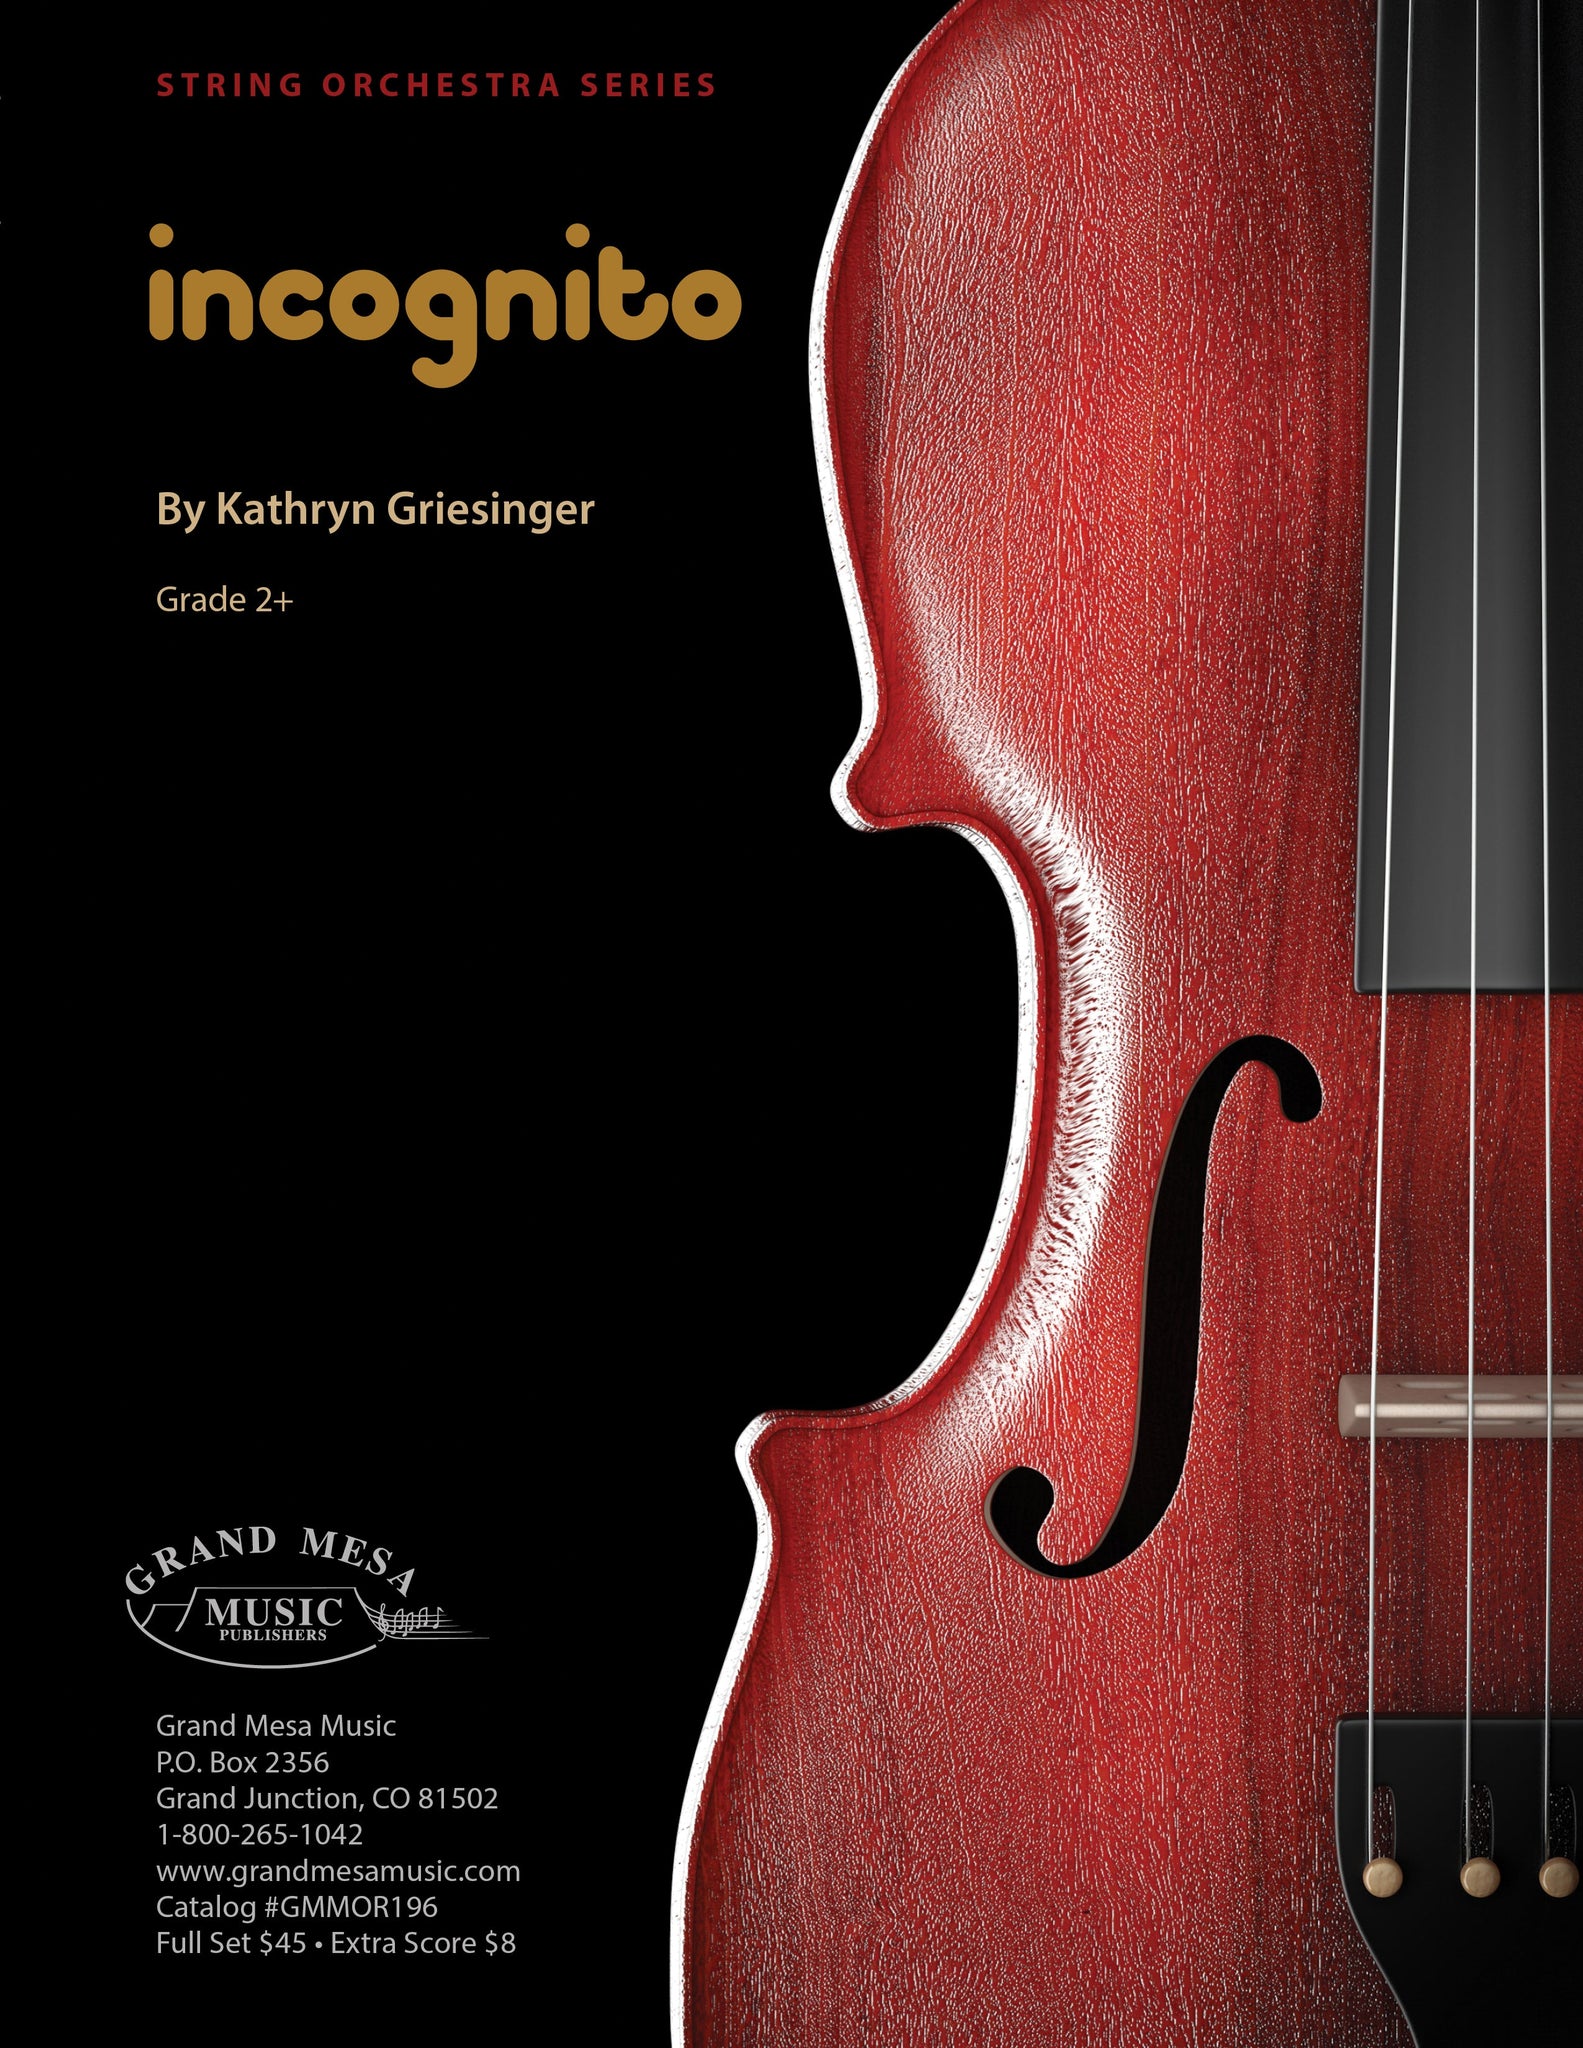 Strings sheet music cover of Incognito, composed by Kathryn Parrish (Griesinger).